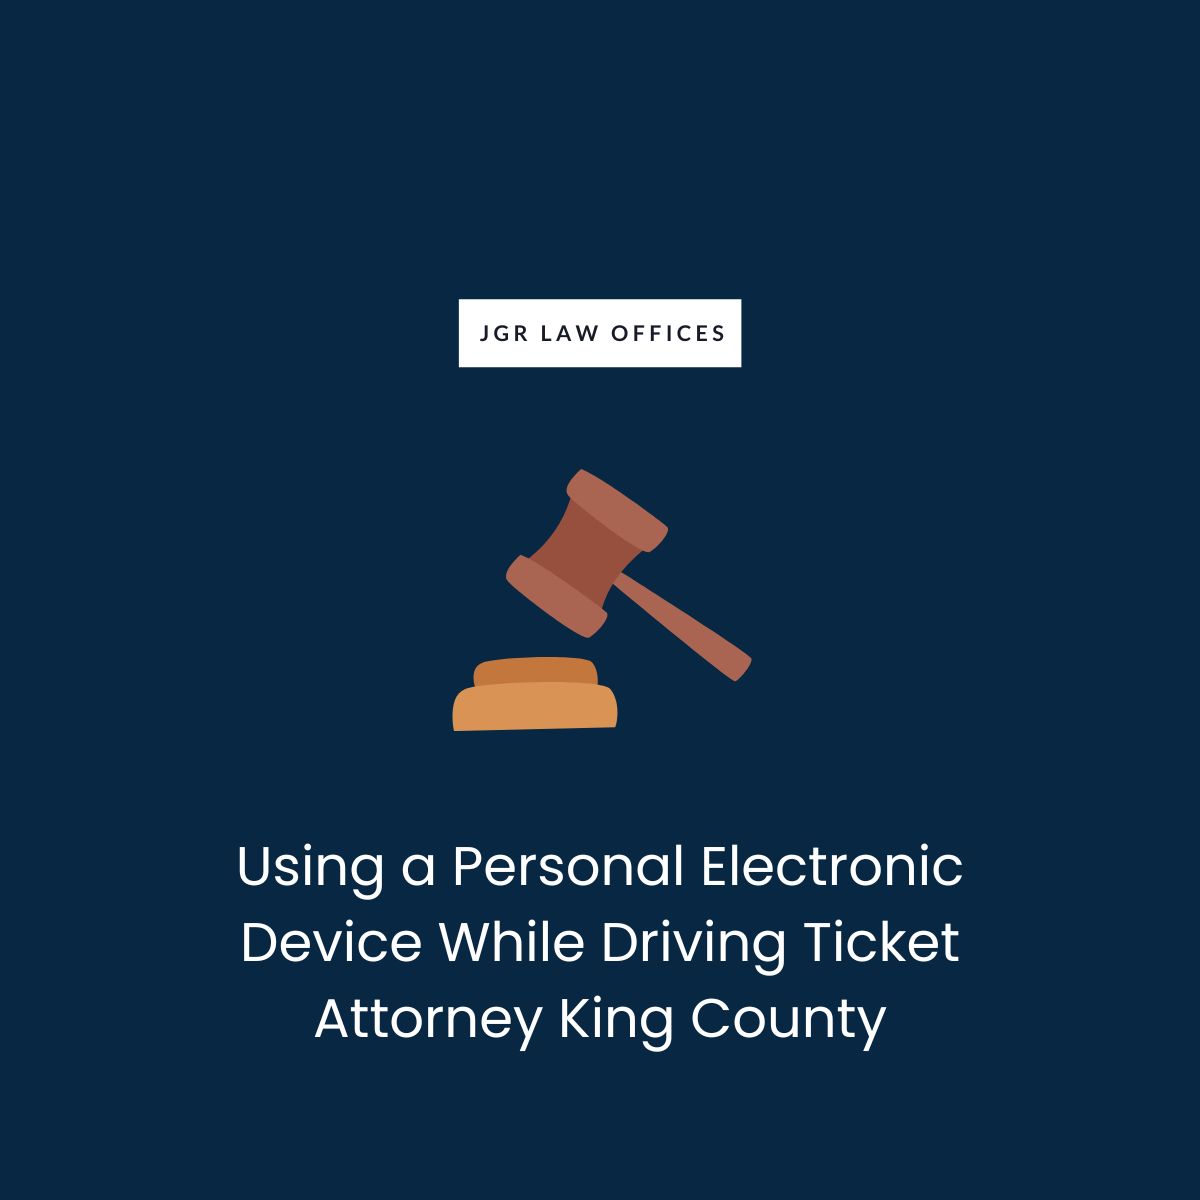 Using a Personal Electronic Device While Driving Ticket Attorney King County